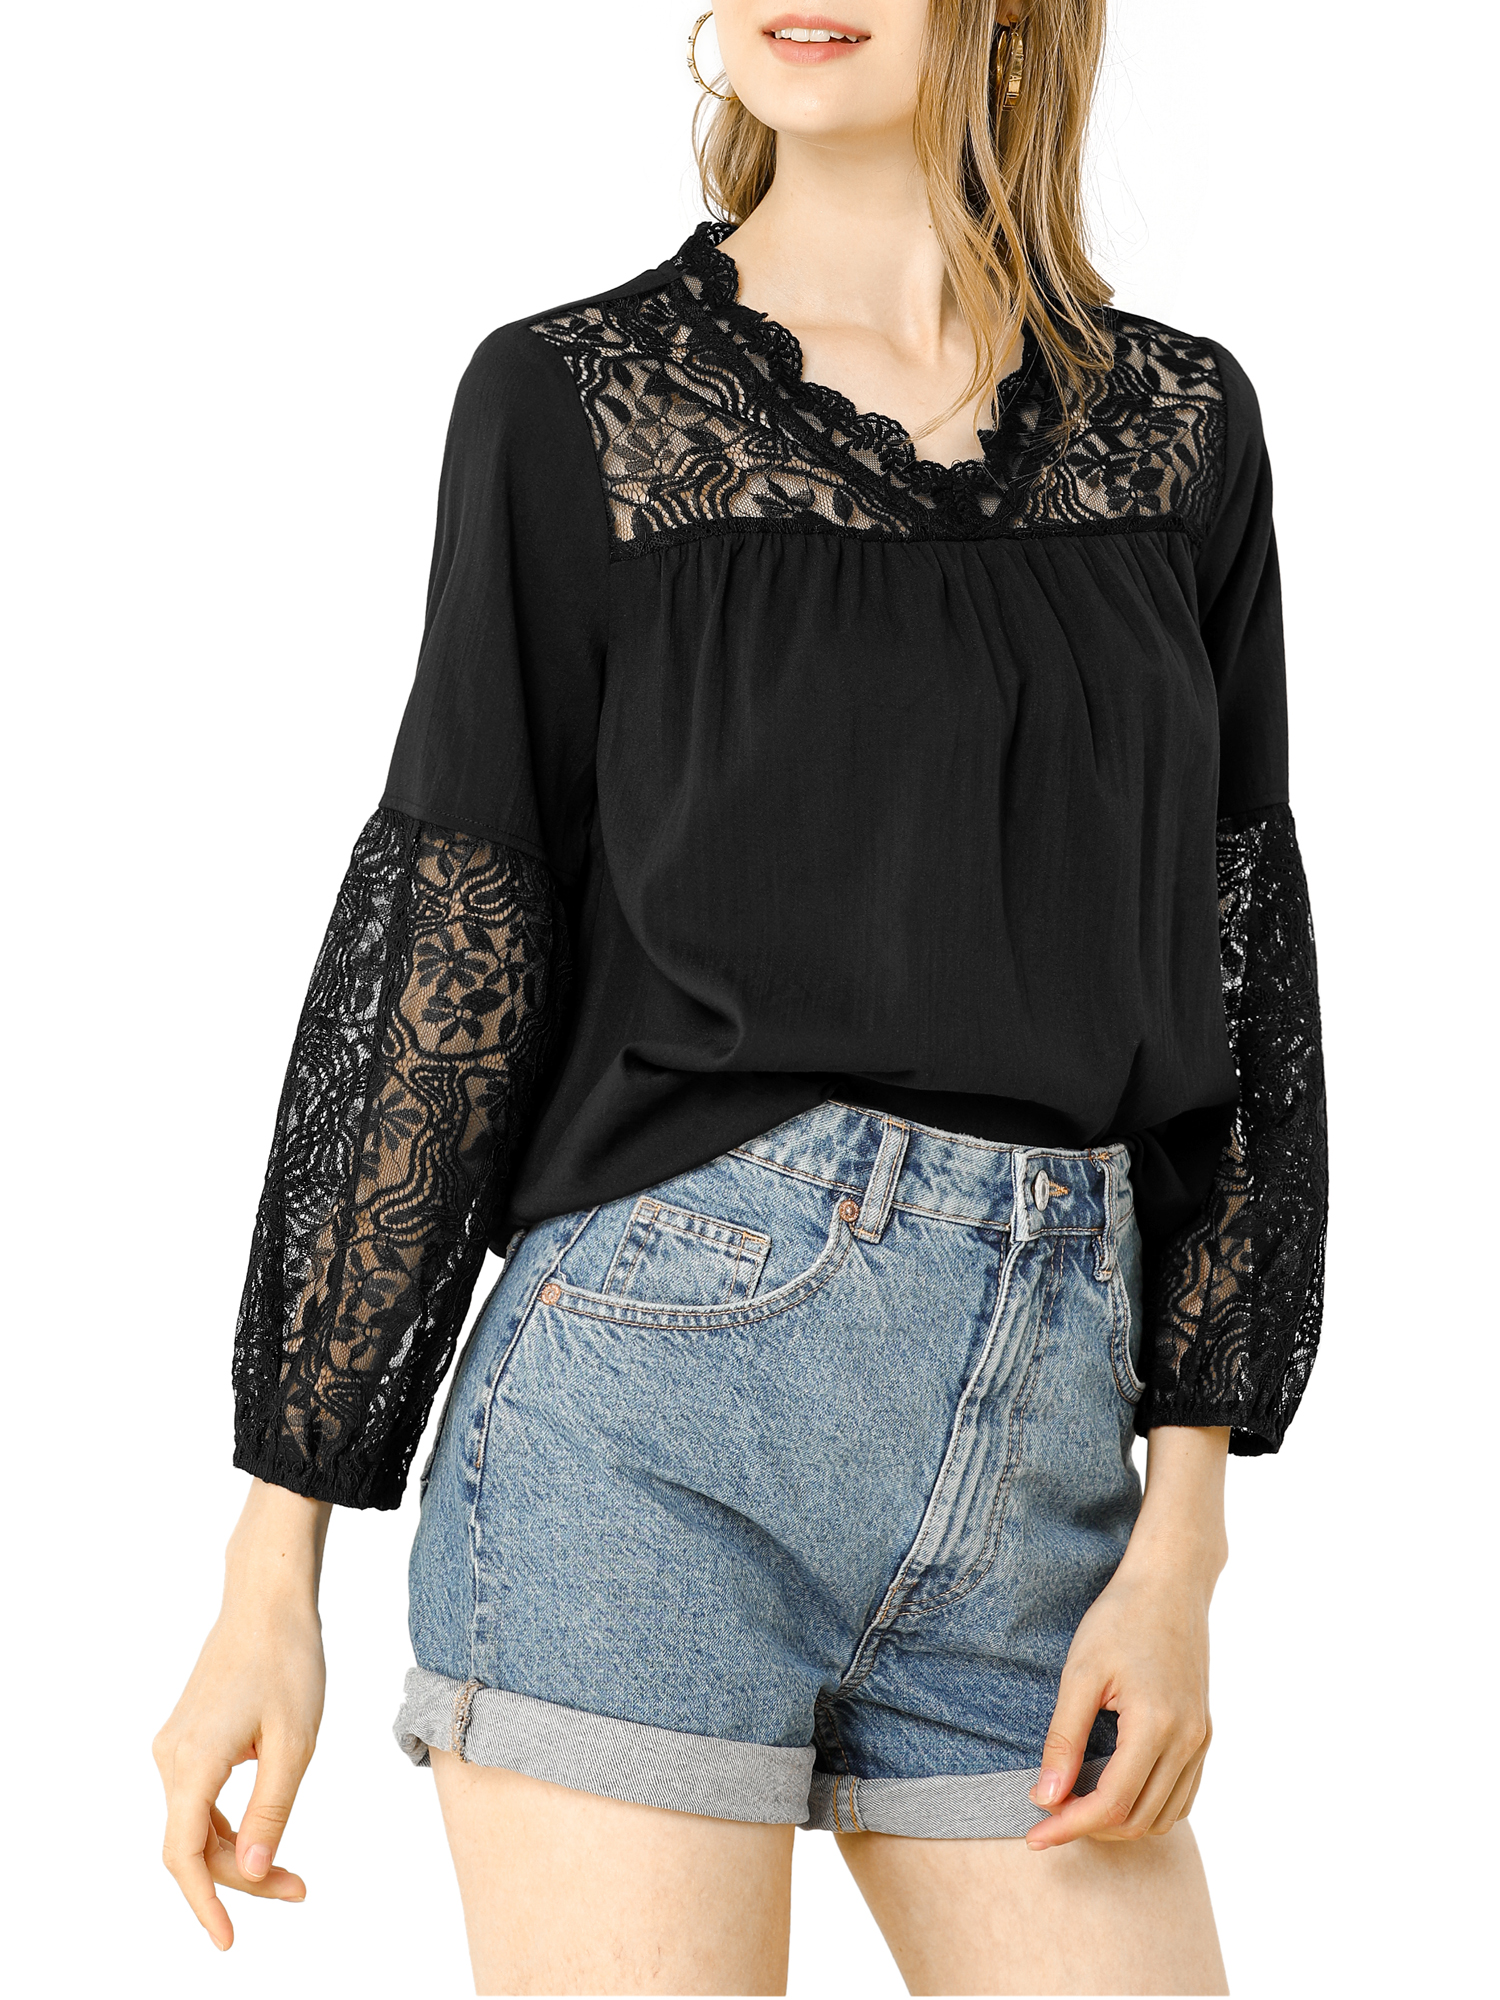 Women's Lace Floral Peasant Patchwork Long Puff Sleeve V Neck Blouse - image 5 of 6